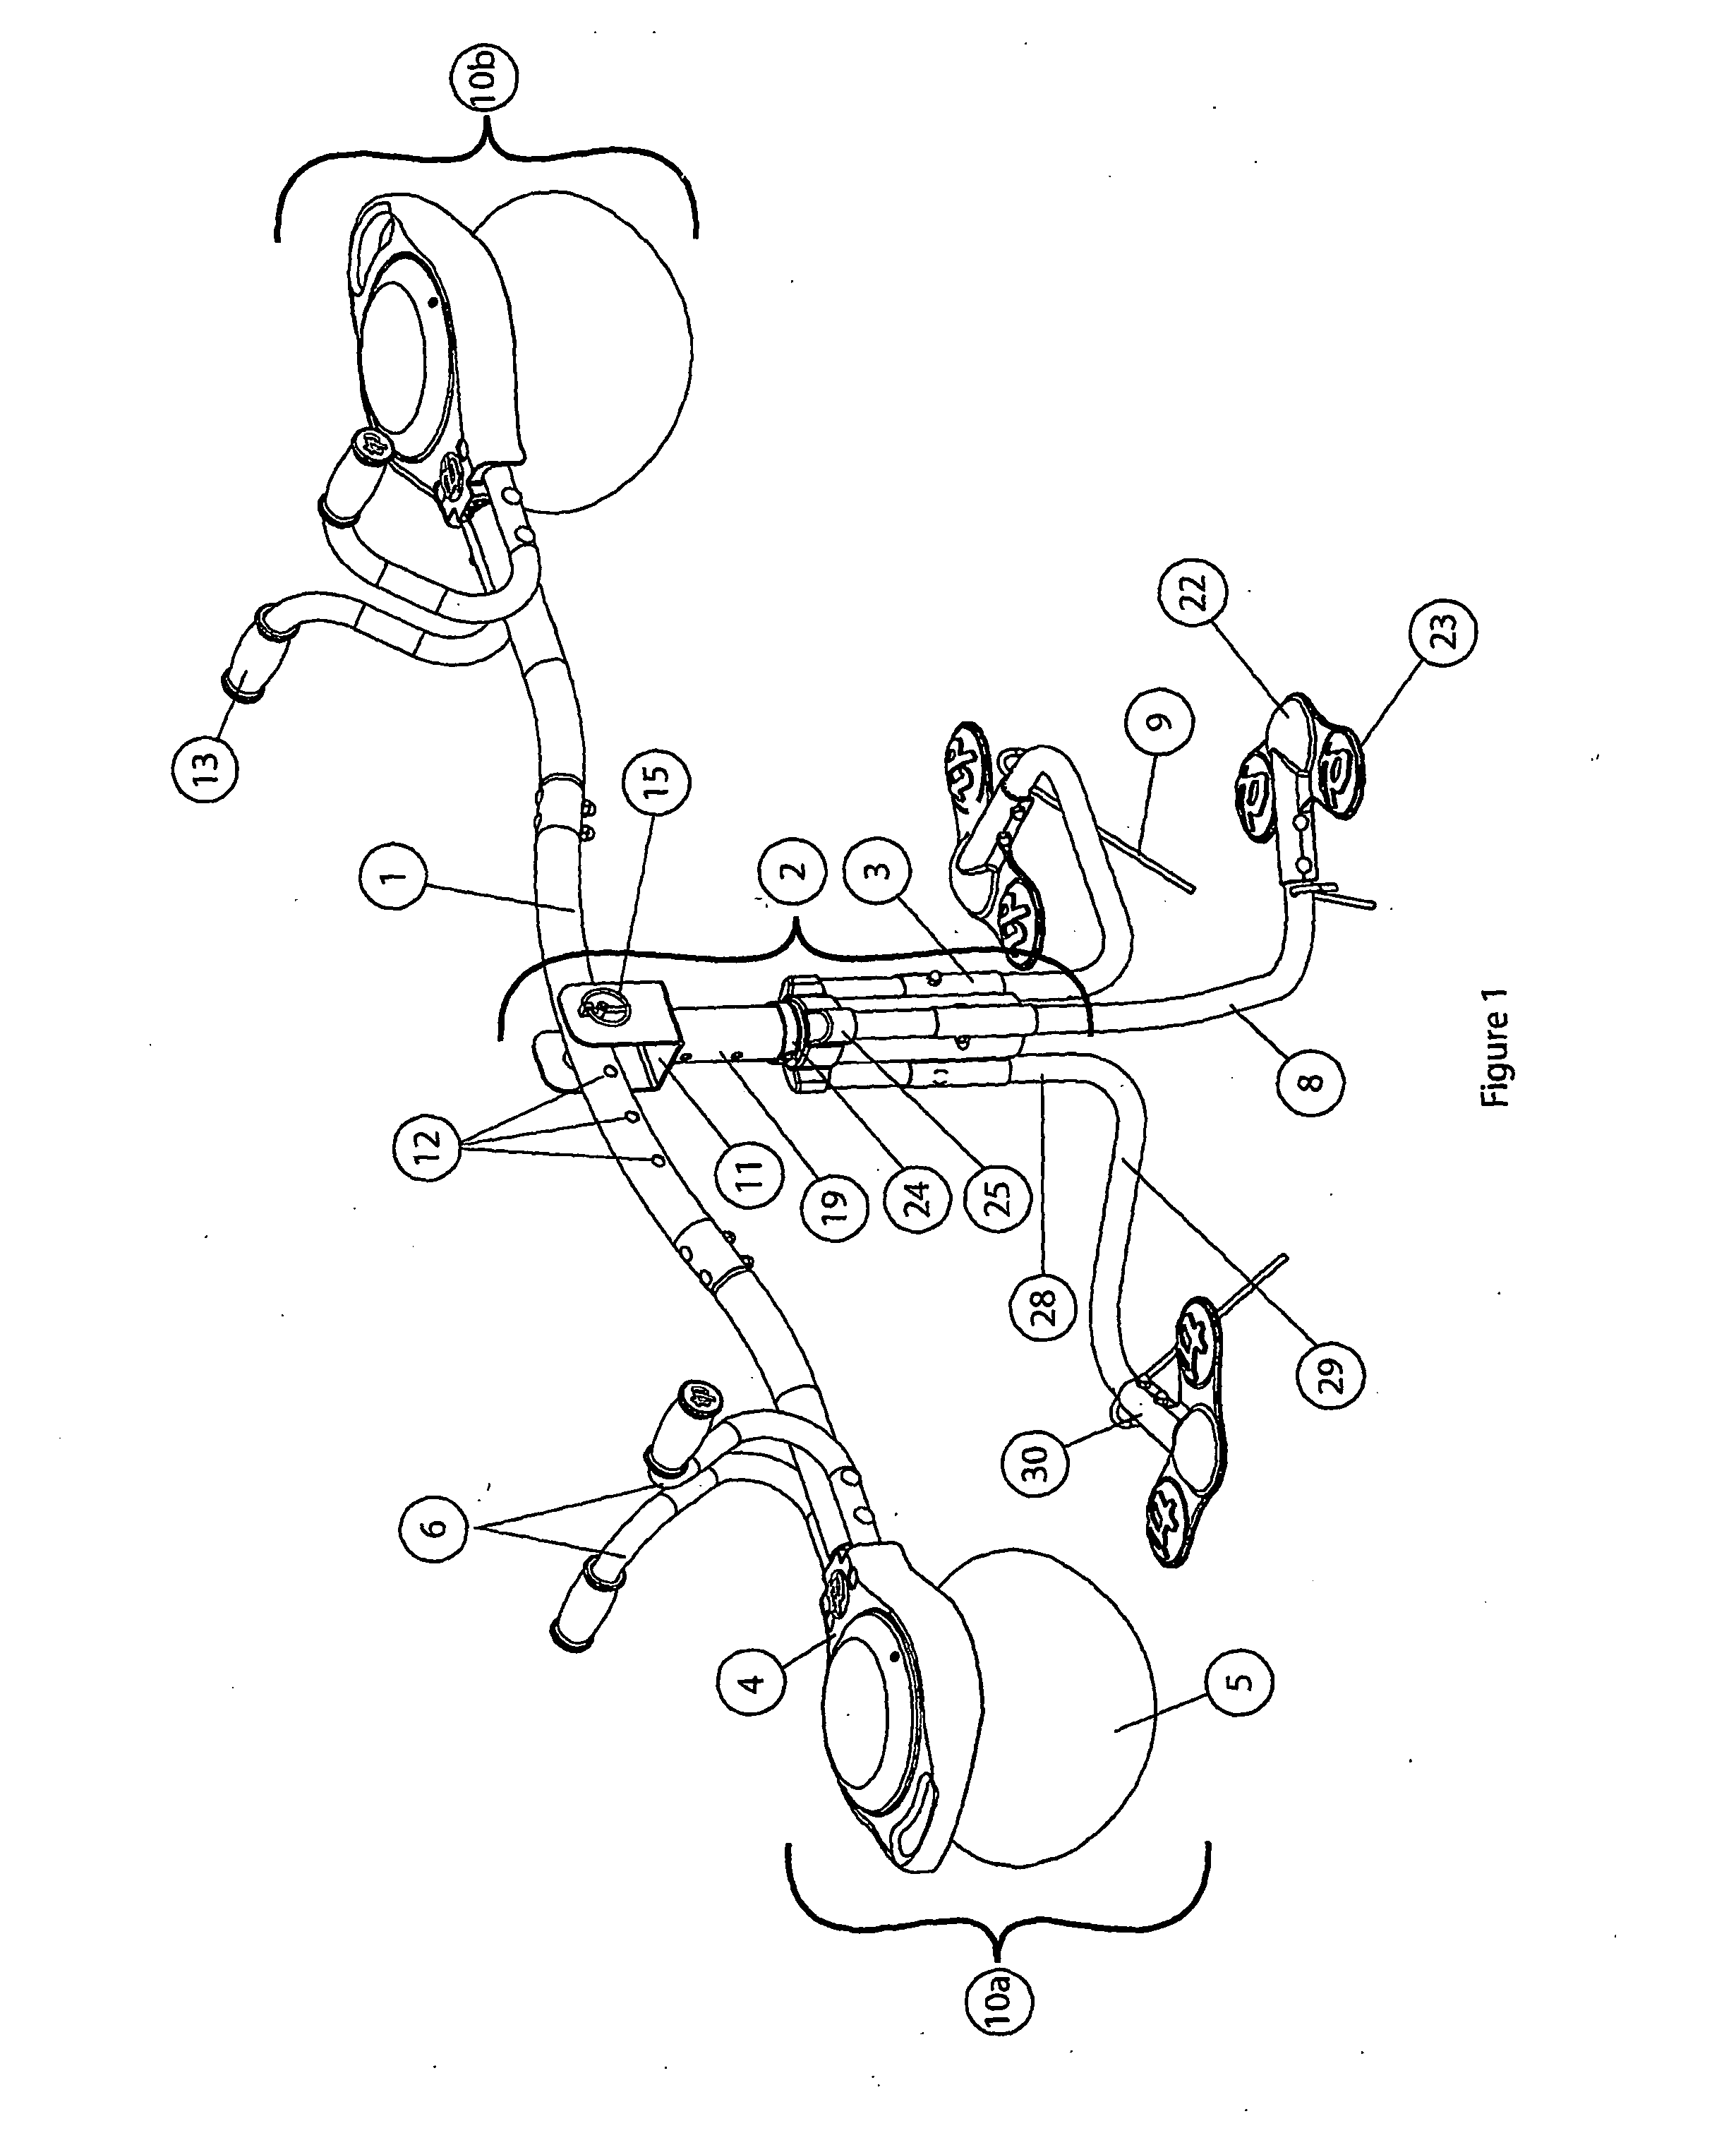 Recreational apparatus providing up and down motion and rotational motion